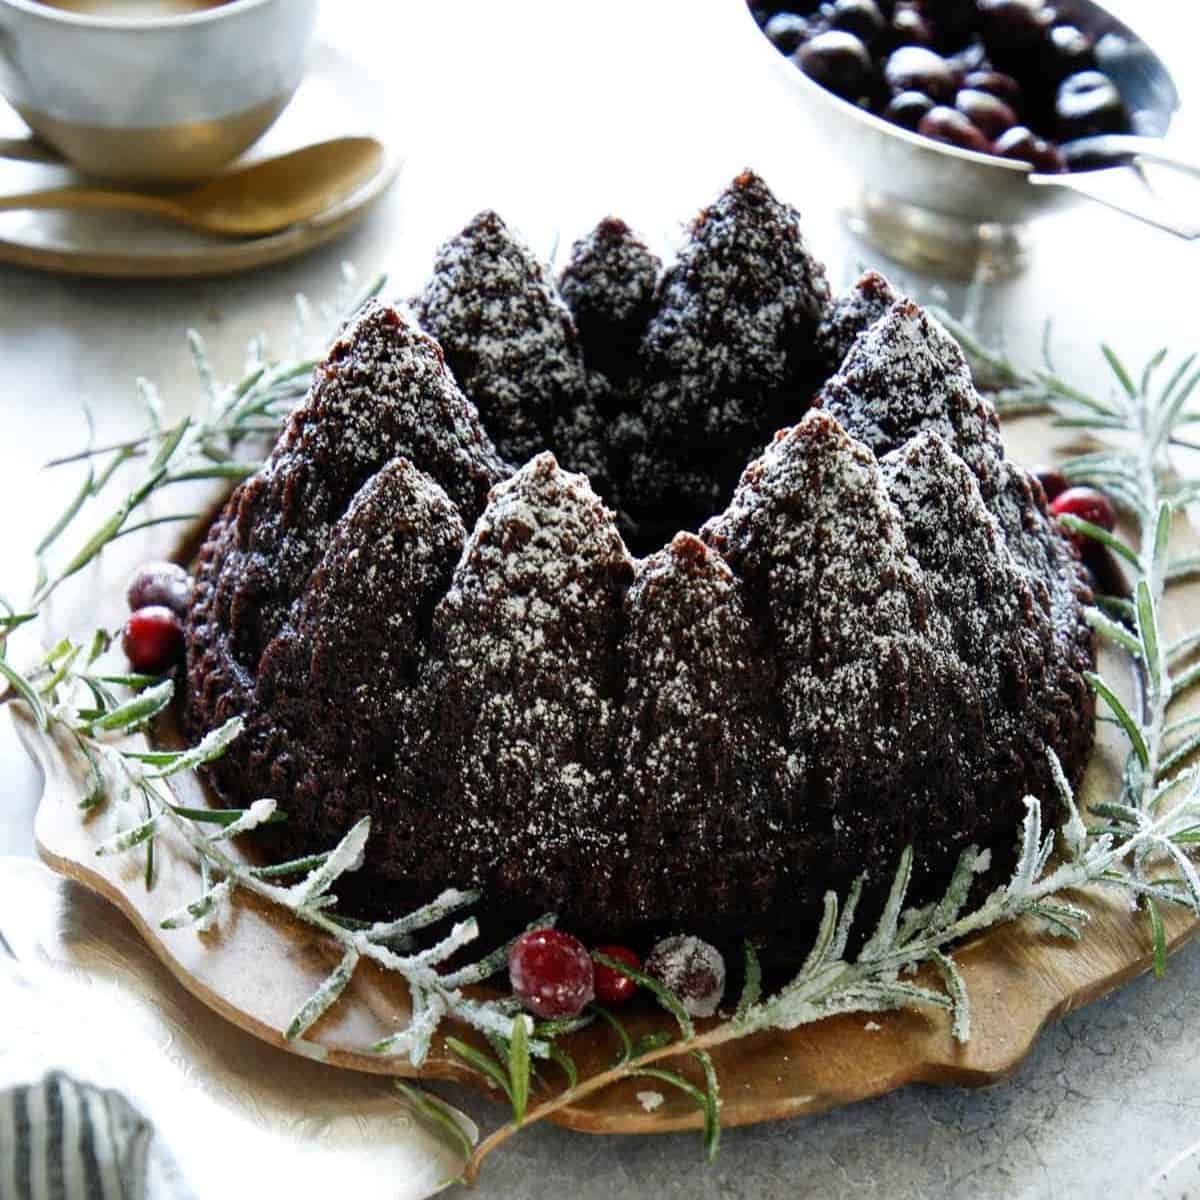 Chocolate Christmas Cake dusted with Powdered Sugar and garnishes with Rosemary Branches